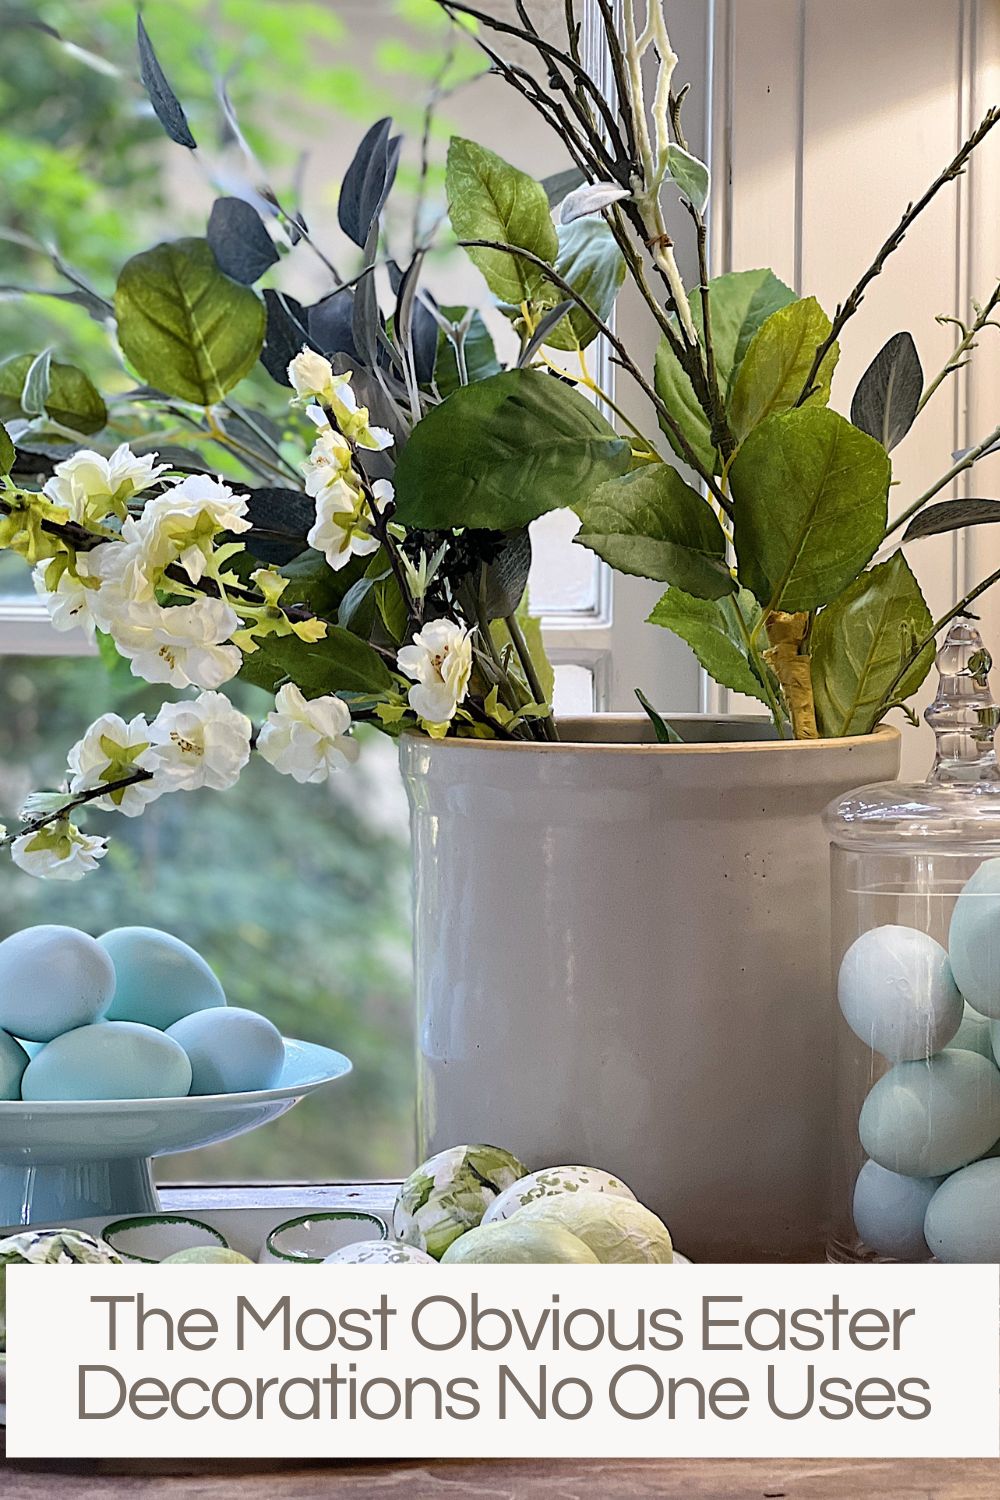 So what are the most obvious Easter decorations that no one uses? Easter eggs, of course. I have them everywhere in our home!